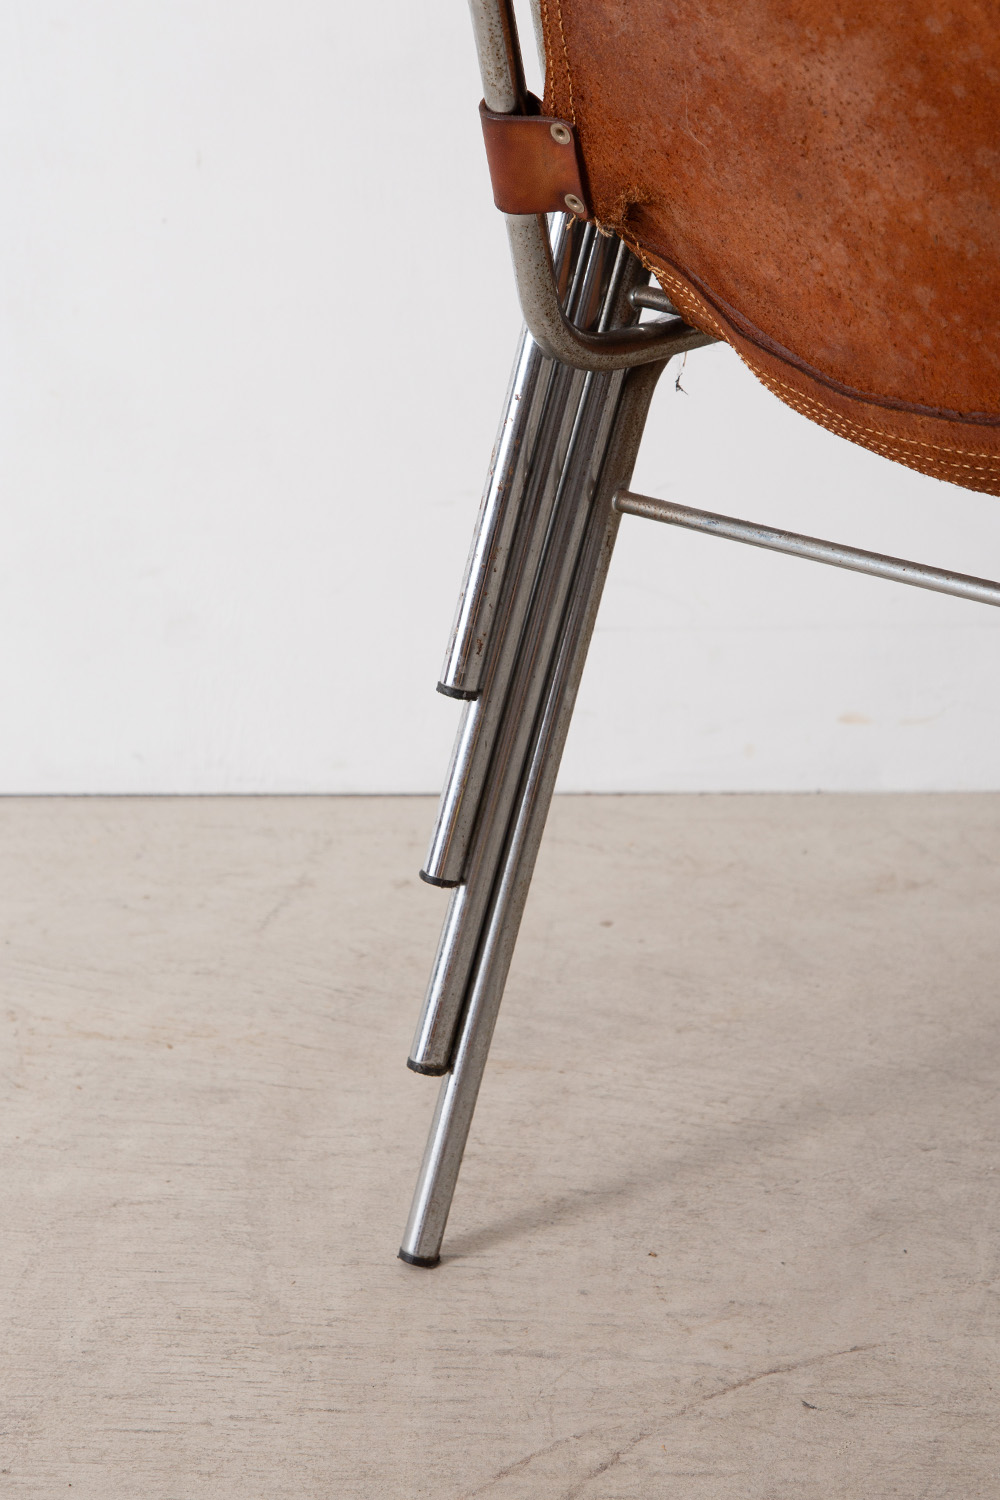 Les arcs Chair in Leather and Steel by Charlotte Perriand